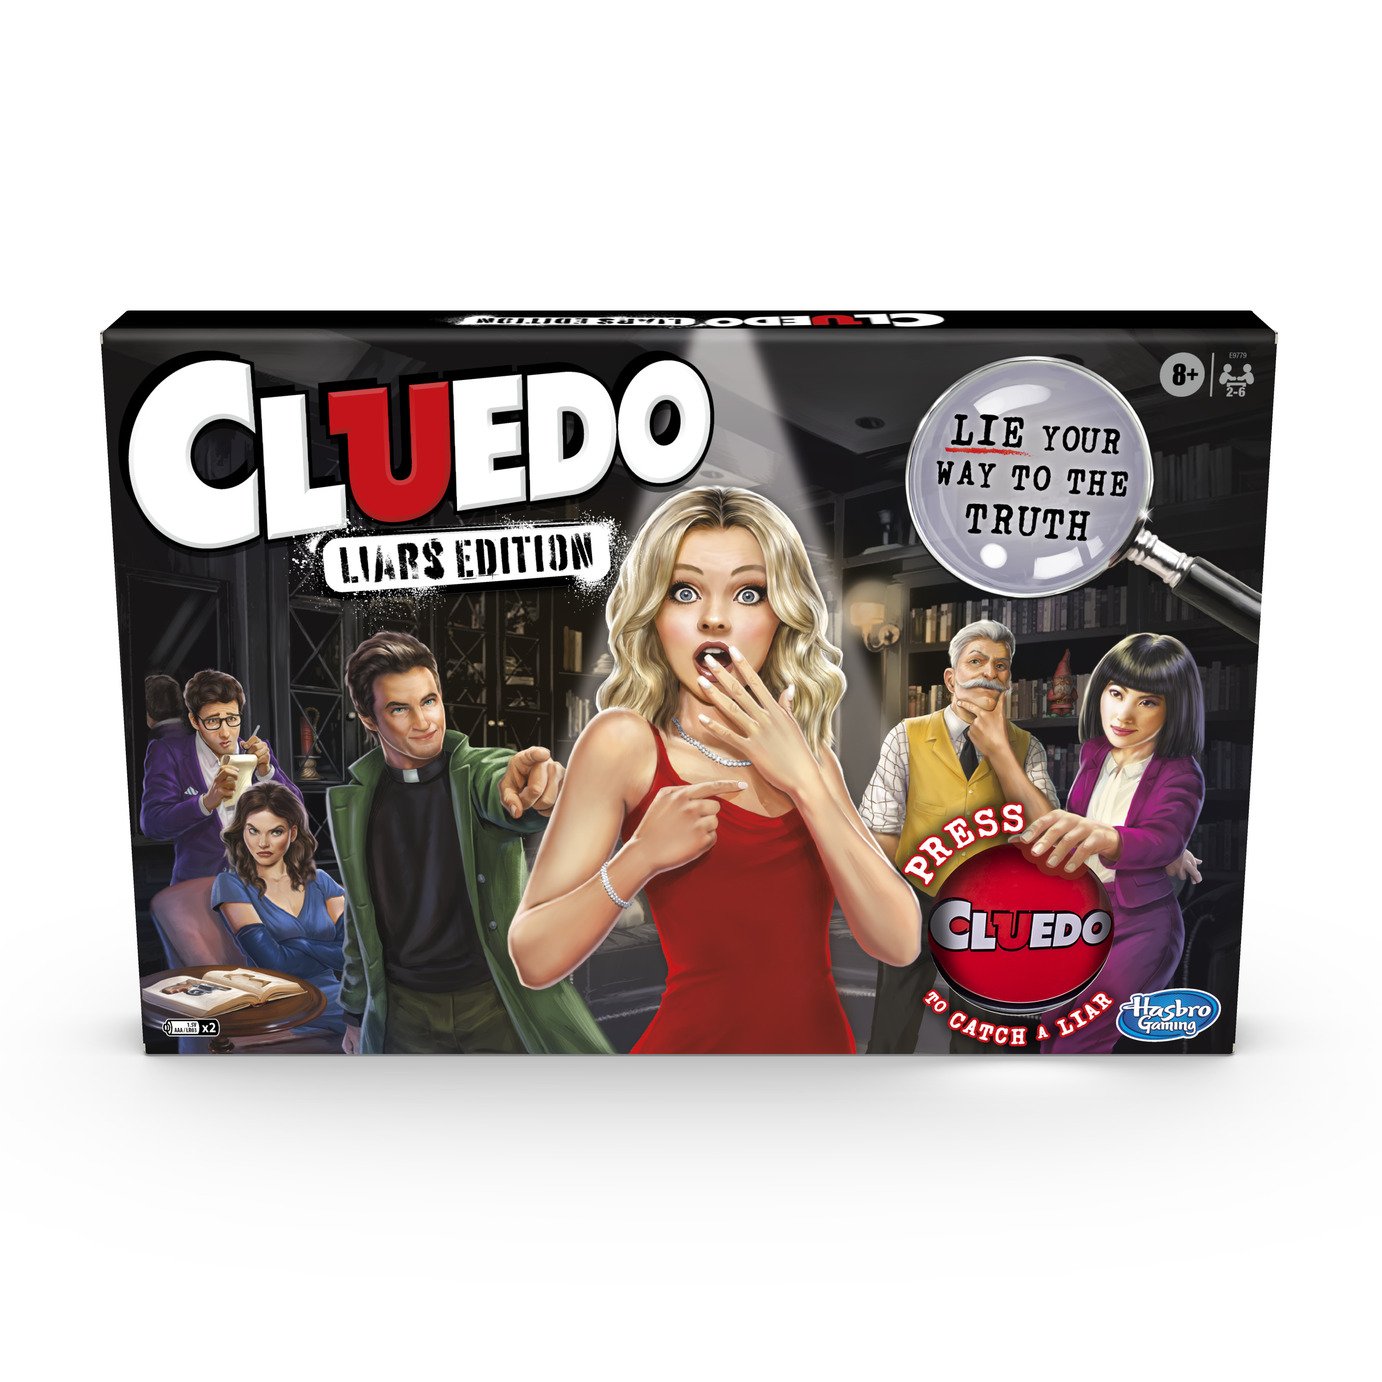 Cluedo Liars Edition Game from Hasbro Gaming Review